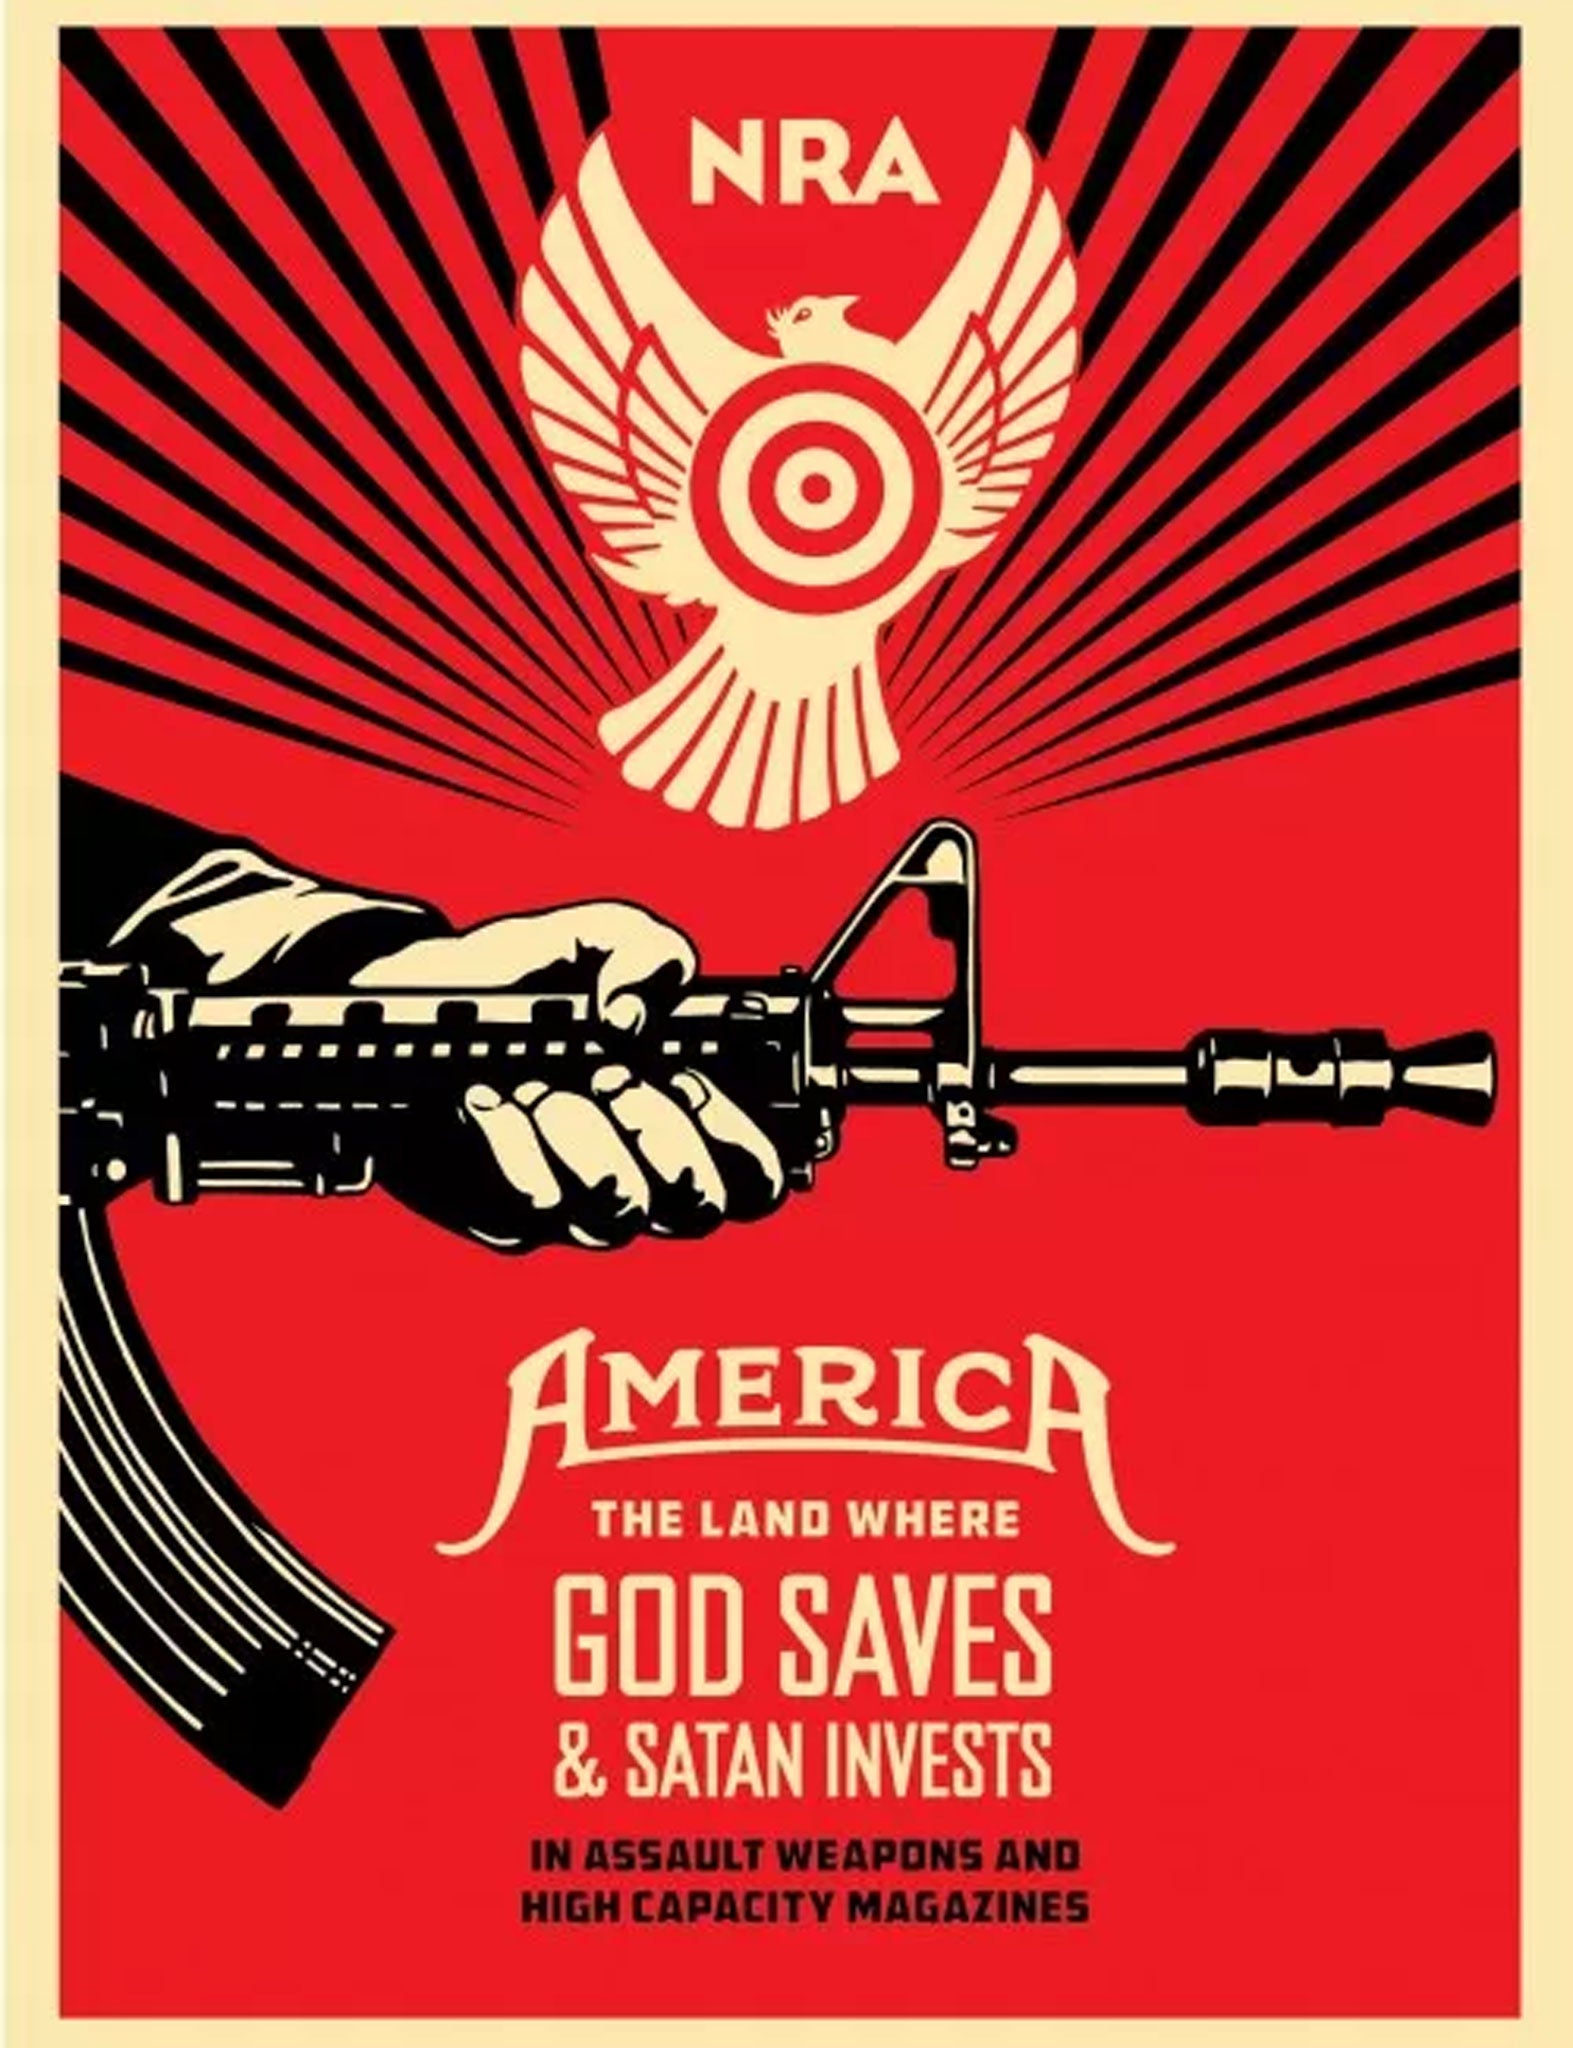 The new artwork by Shepard Fairey, attacking the anti-gun control lobby in America